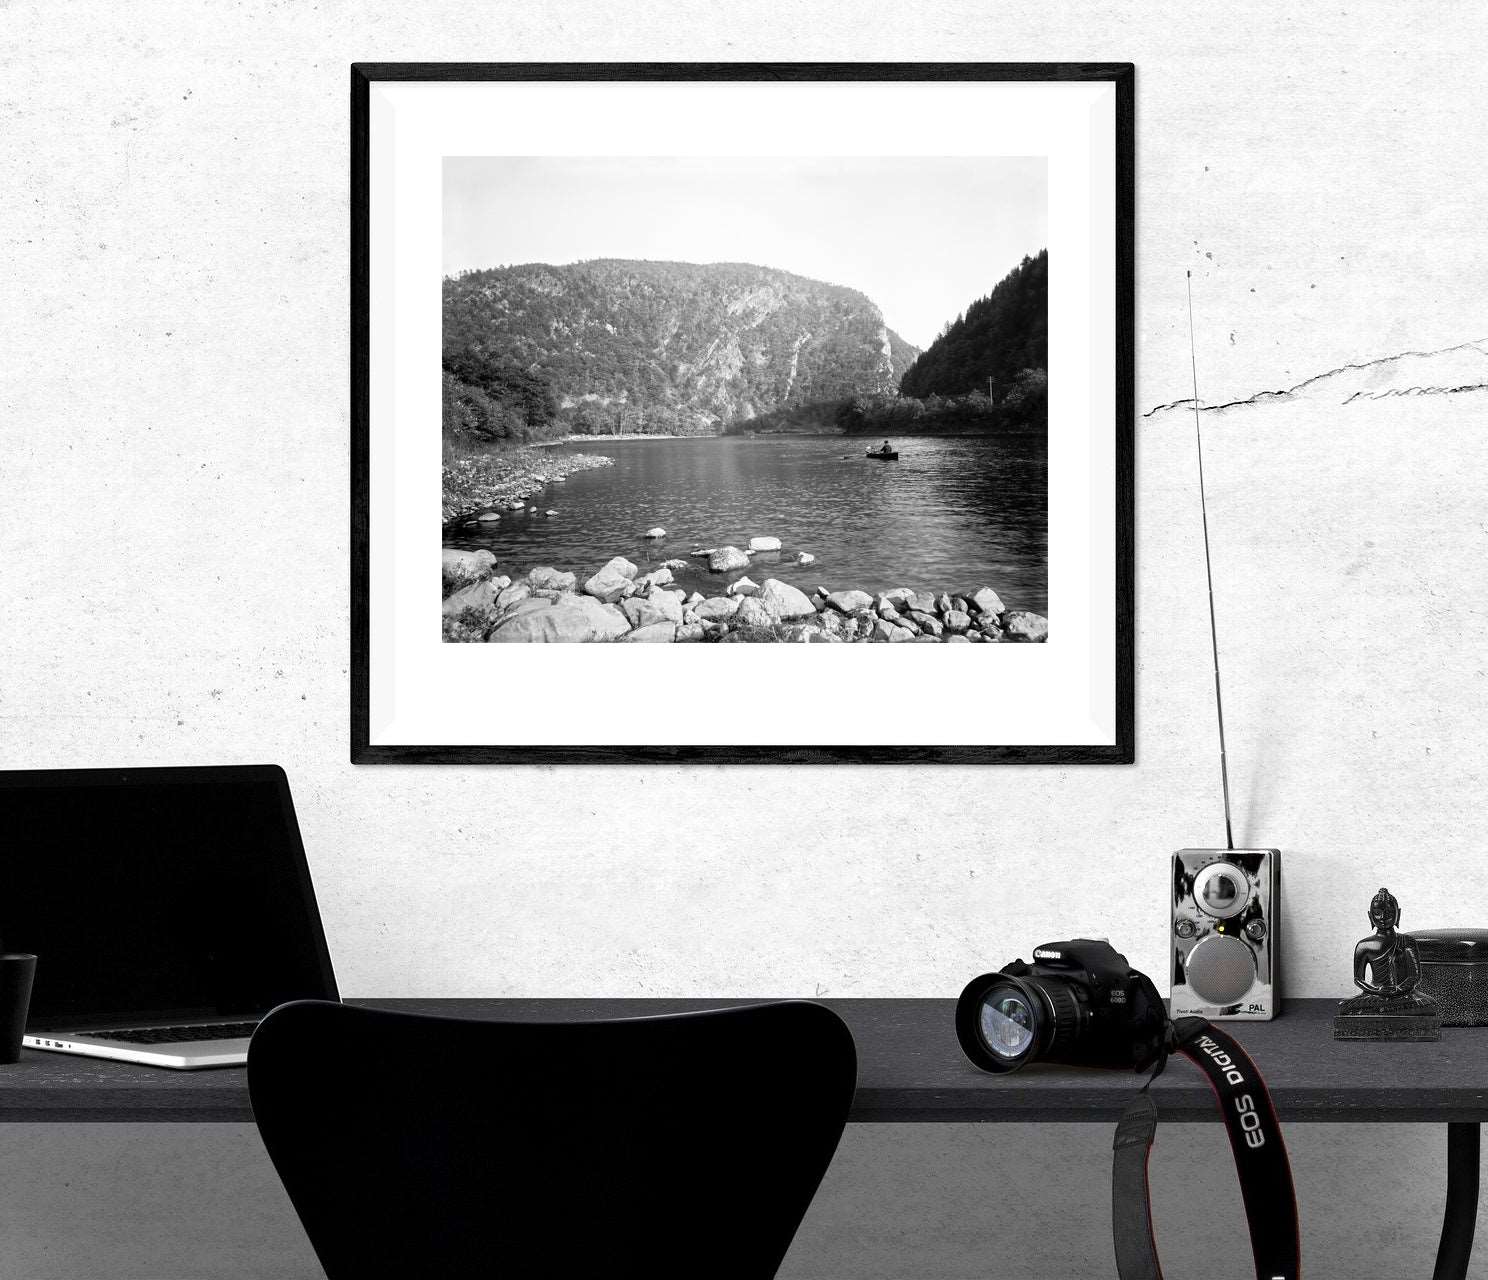 A framed paper print hanging on a white wall, featuring a vintage photograph of a canoe on the Delaware Water Gap